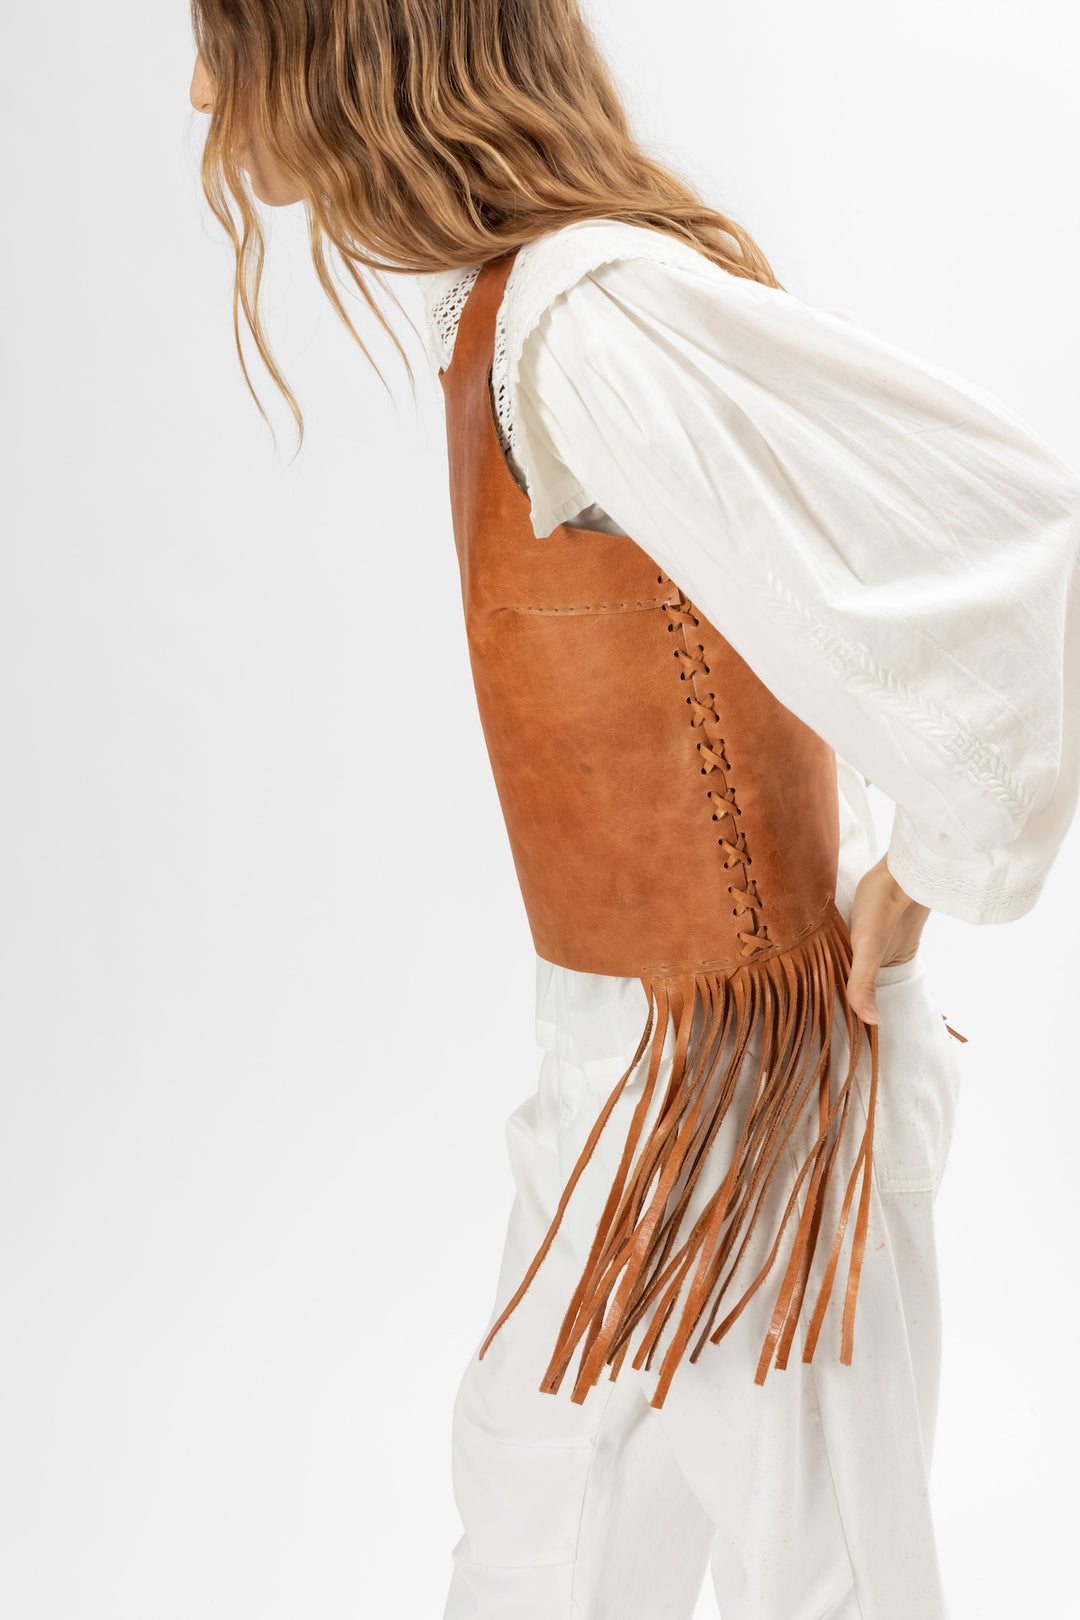 Leather top with fringes. Hand Matters.